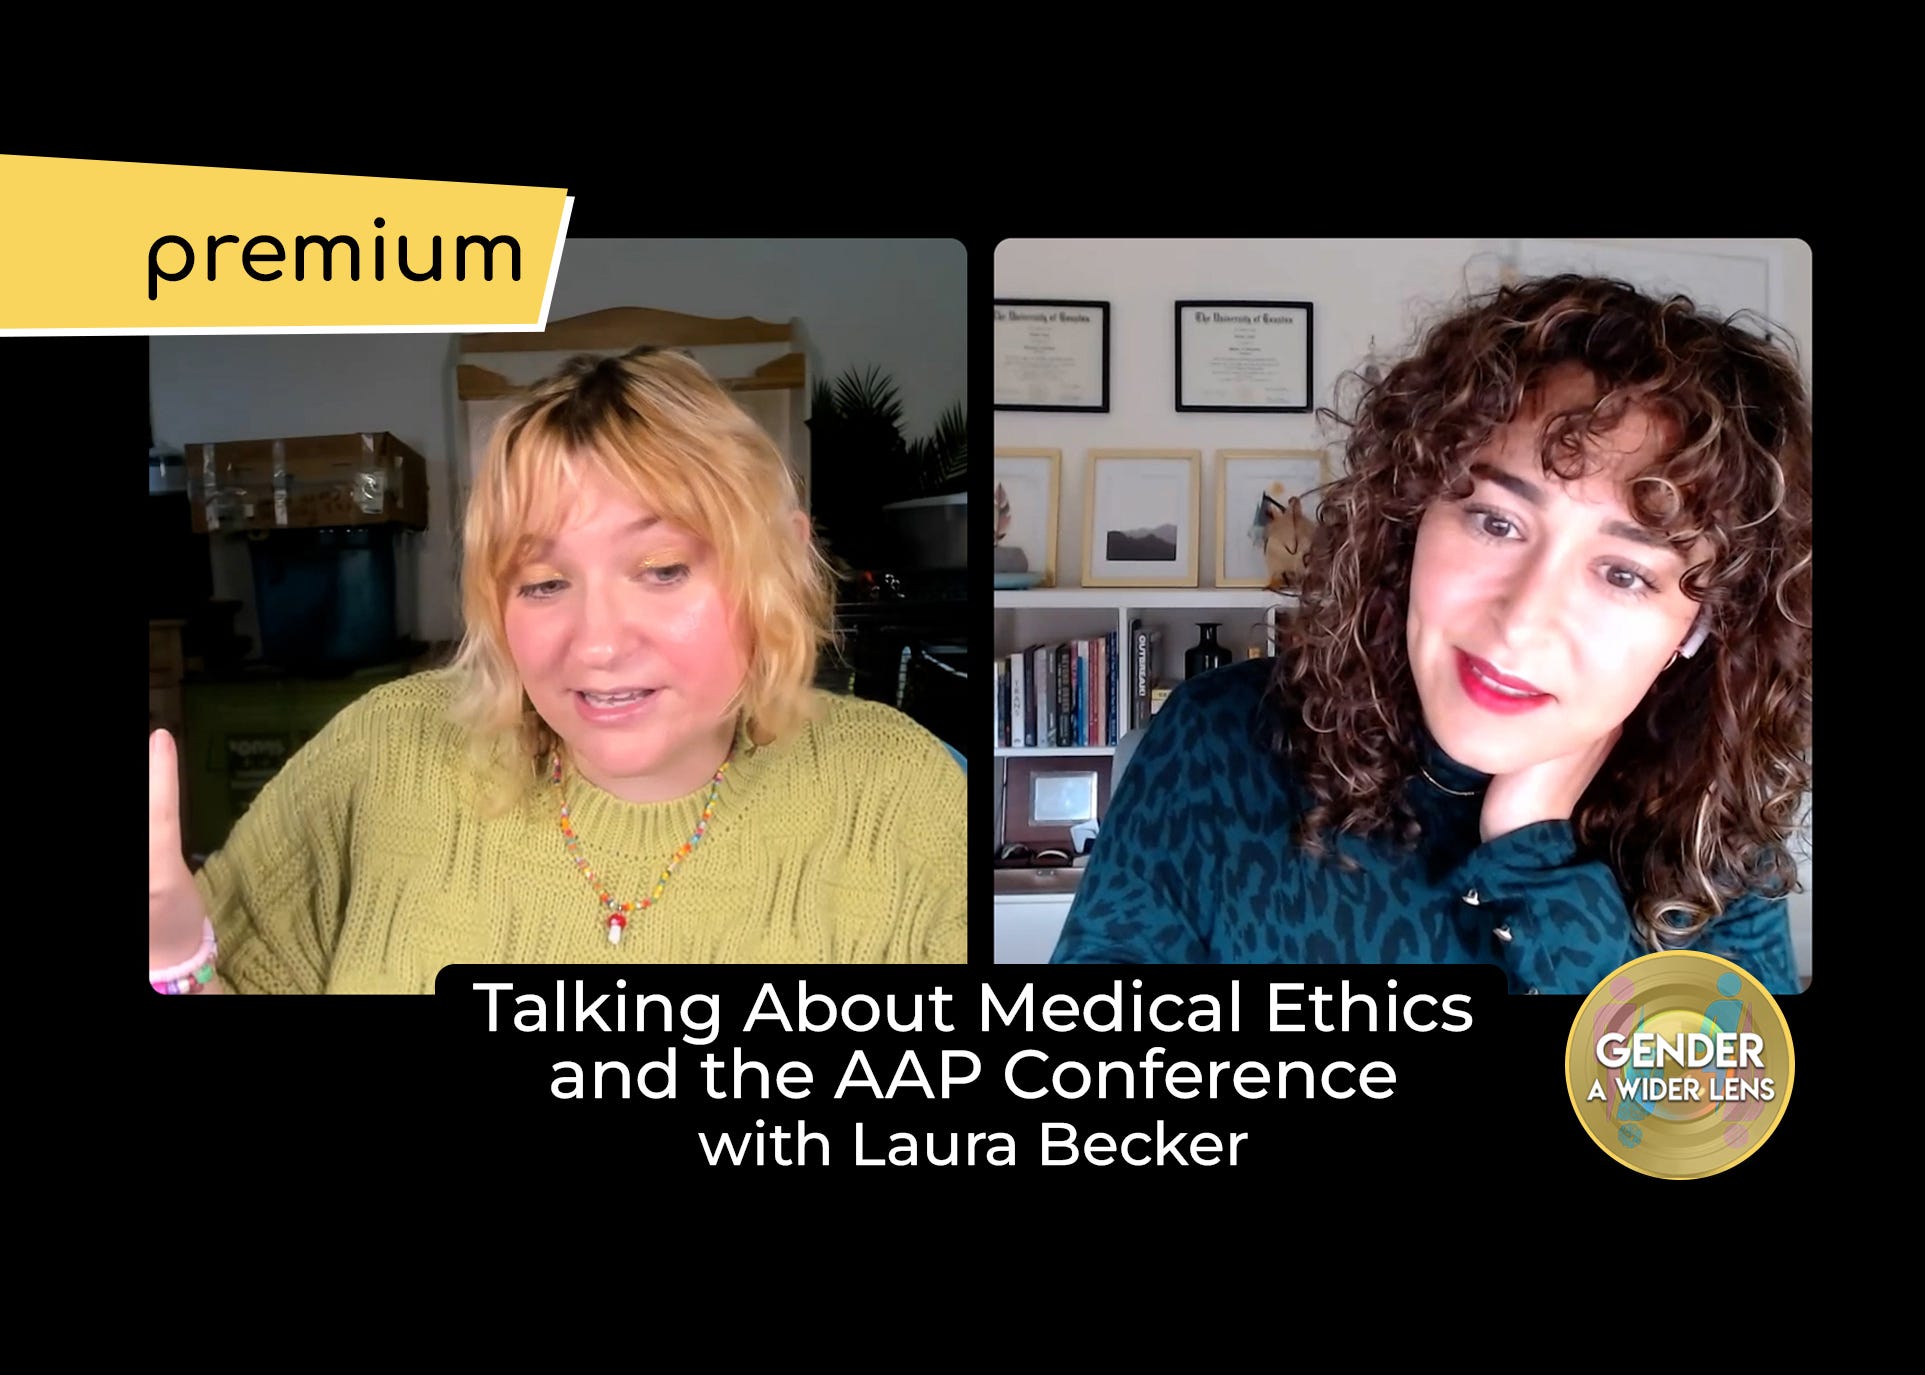 Premium: Talking About Medical Ethics and the AAP Conference with Laura Becker